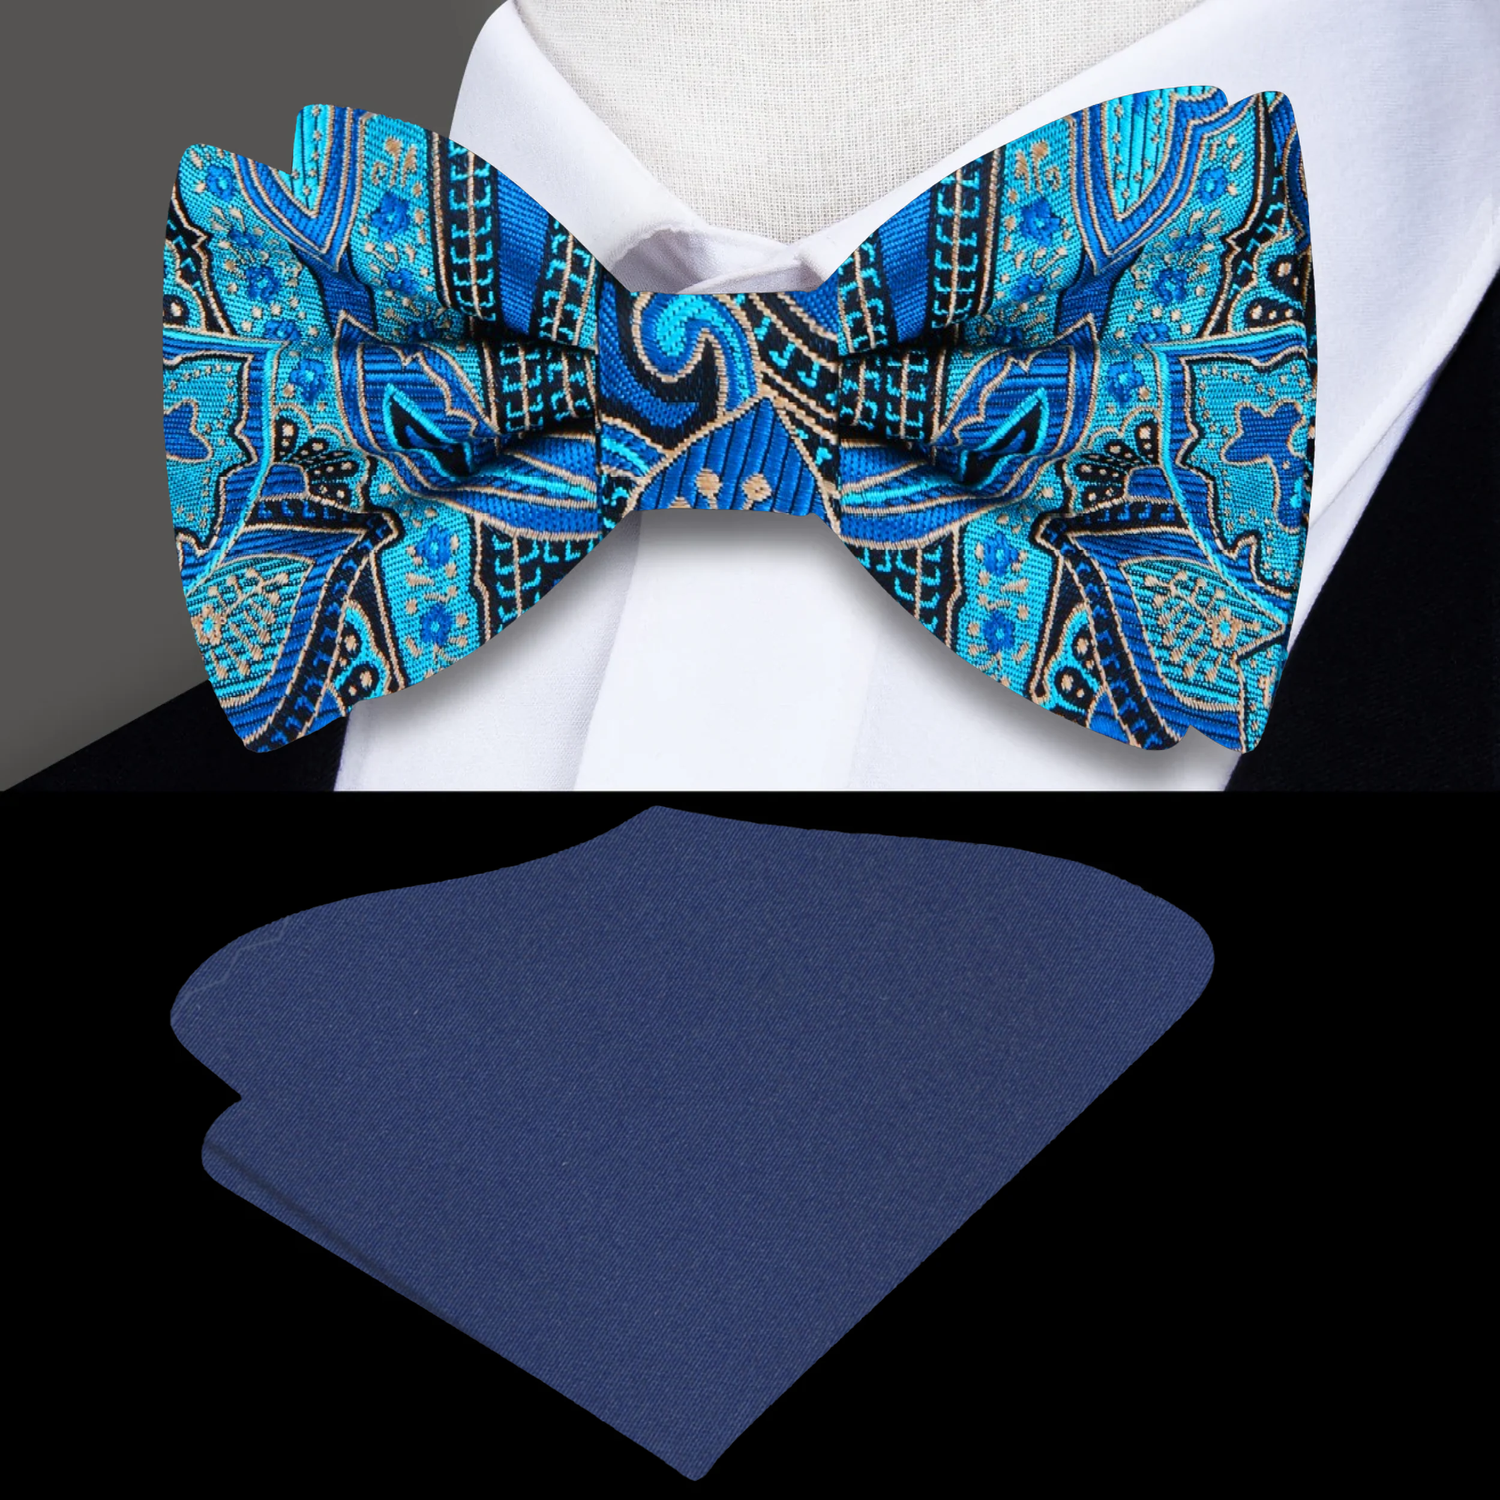 A Teal Blue, Black Abstract Floral Pattern Silk Bow Tie, Blue Pocket Square